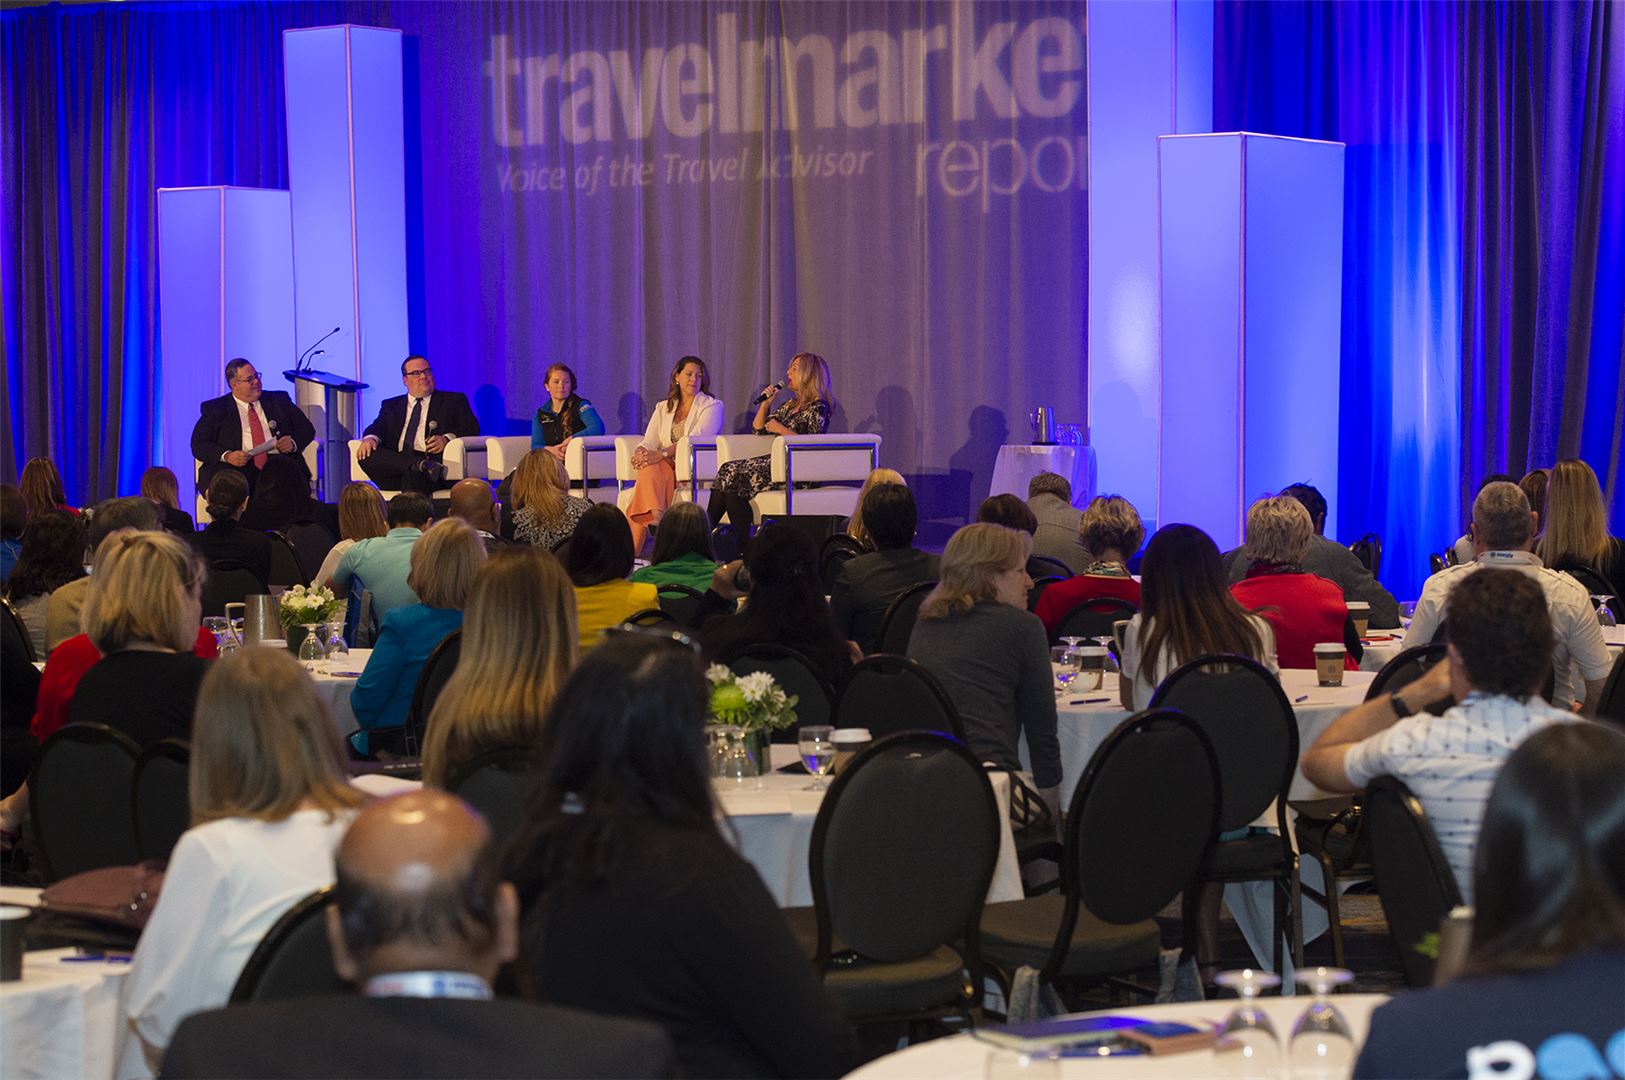 Travel MarketPlace 2019 Opens in Toronto